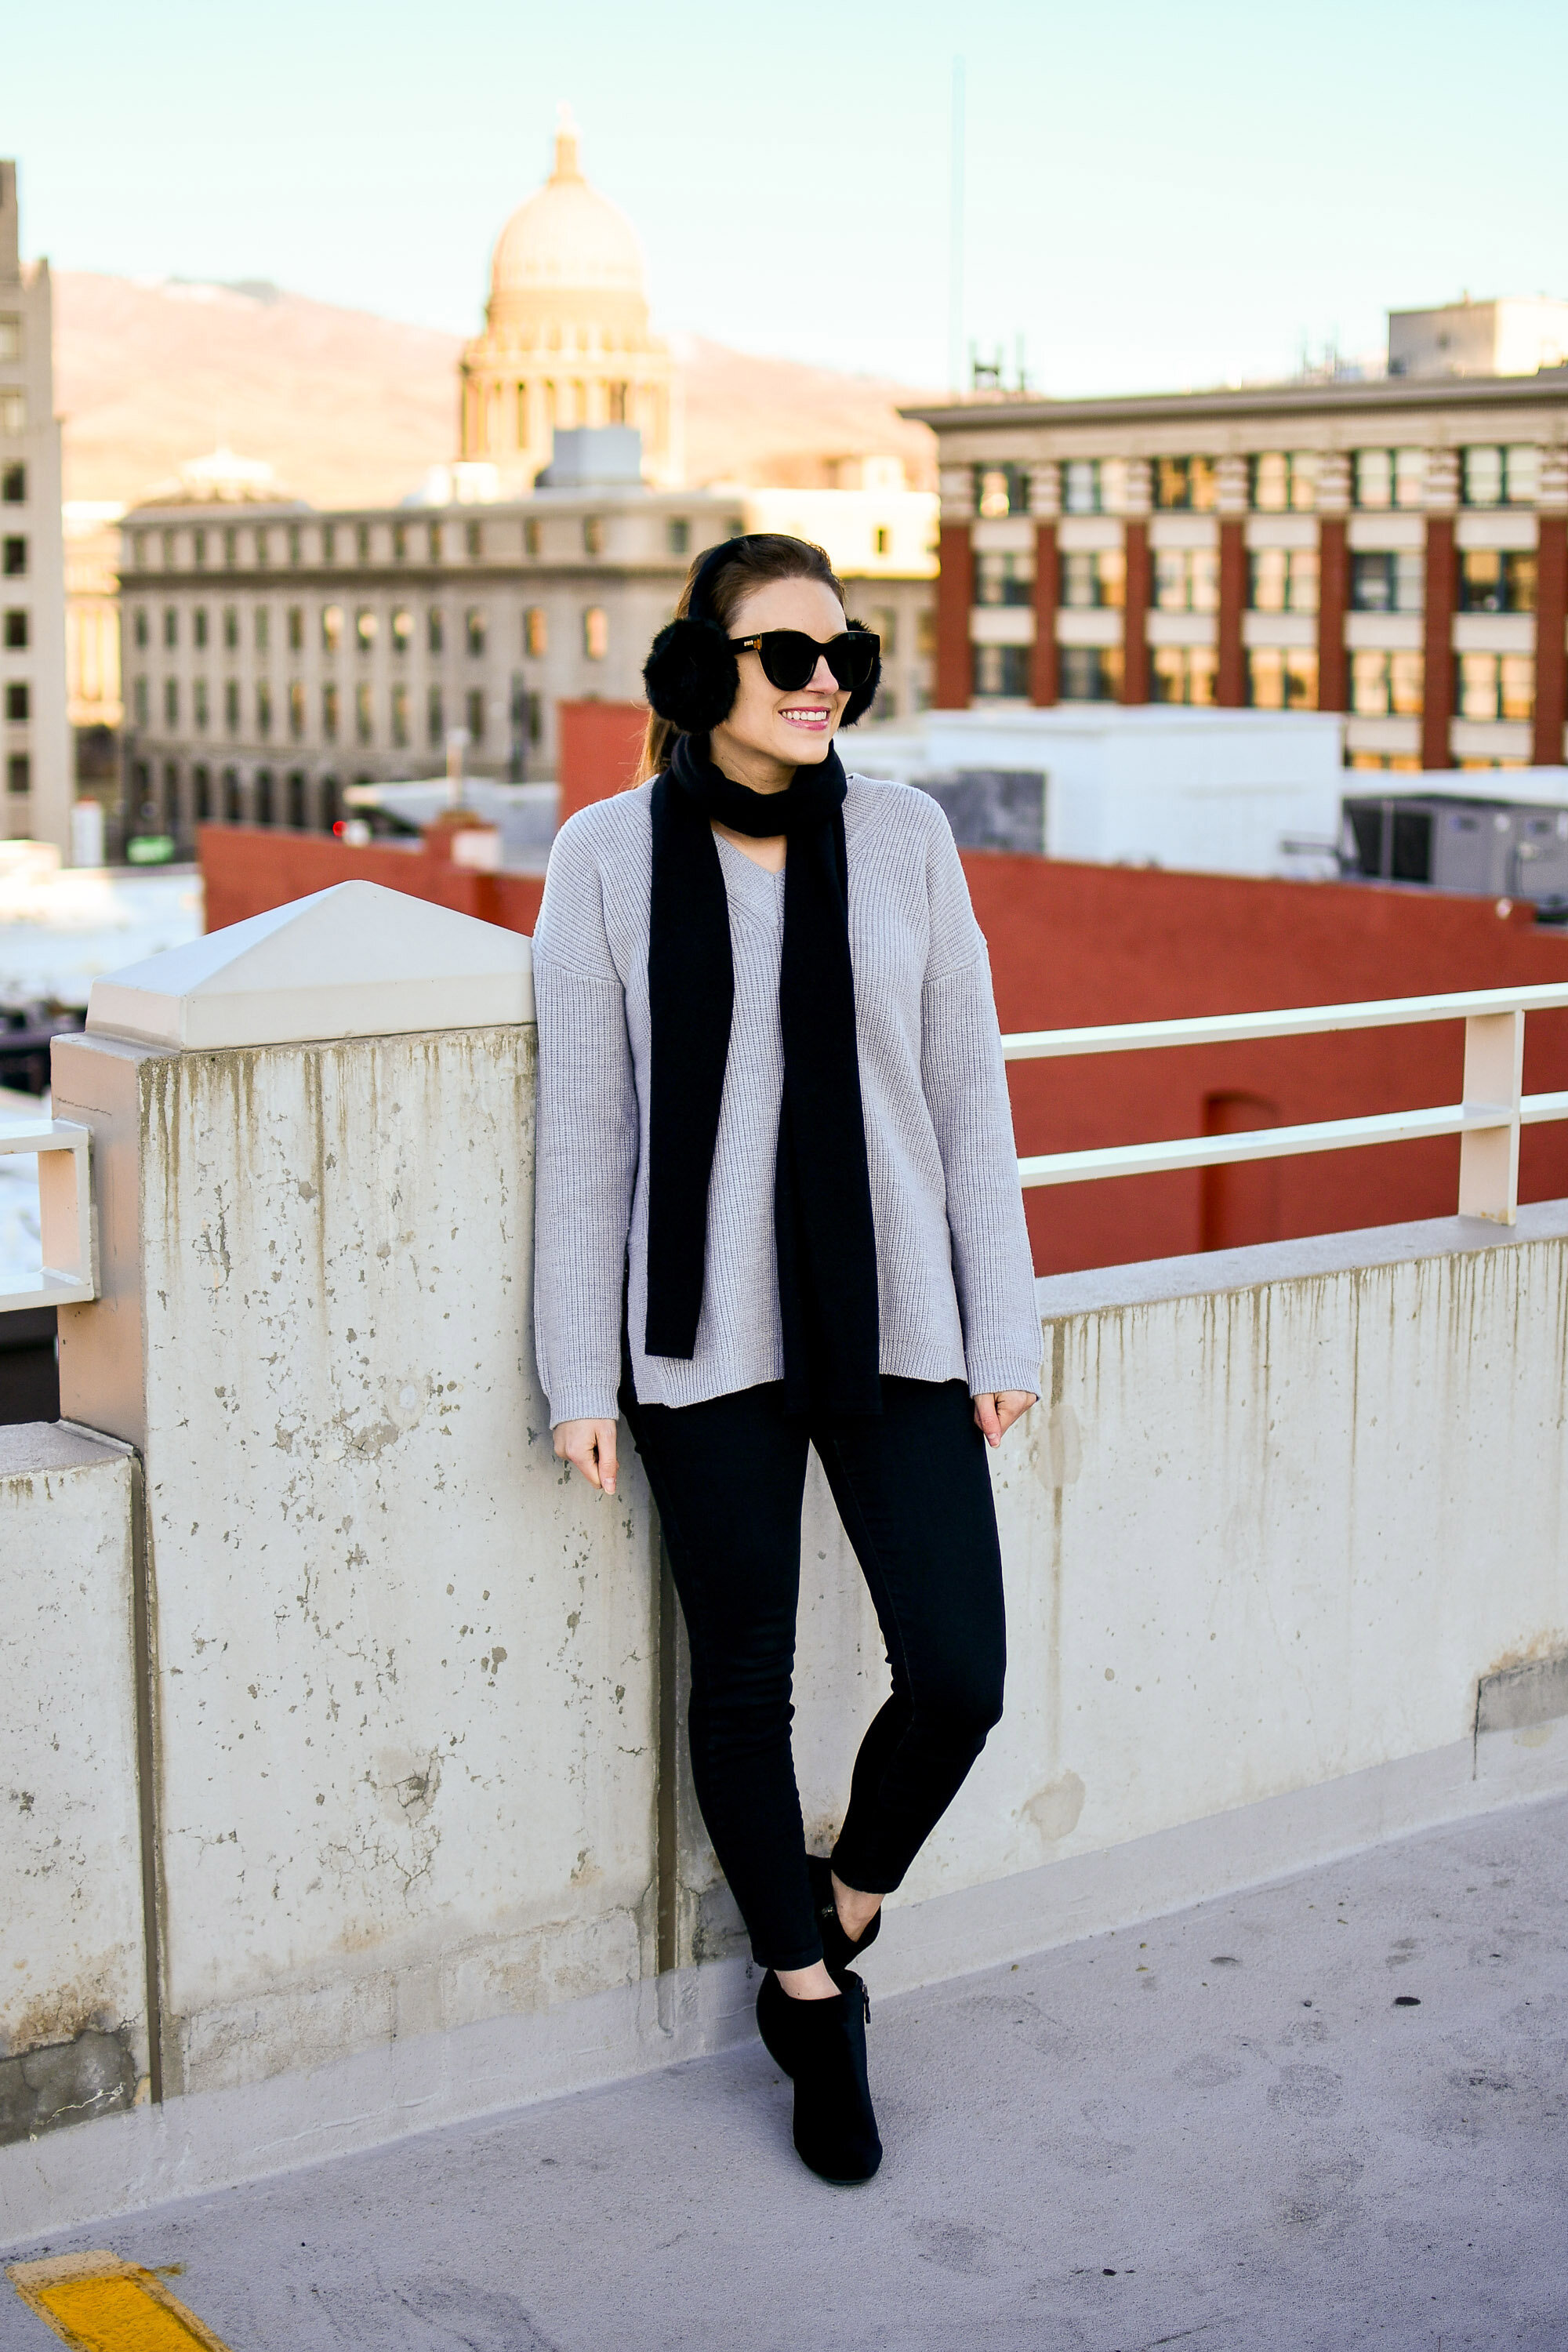 Black and grey cold weather outfit